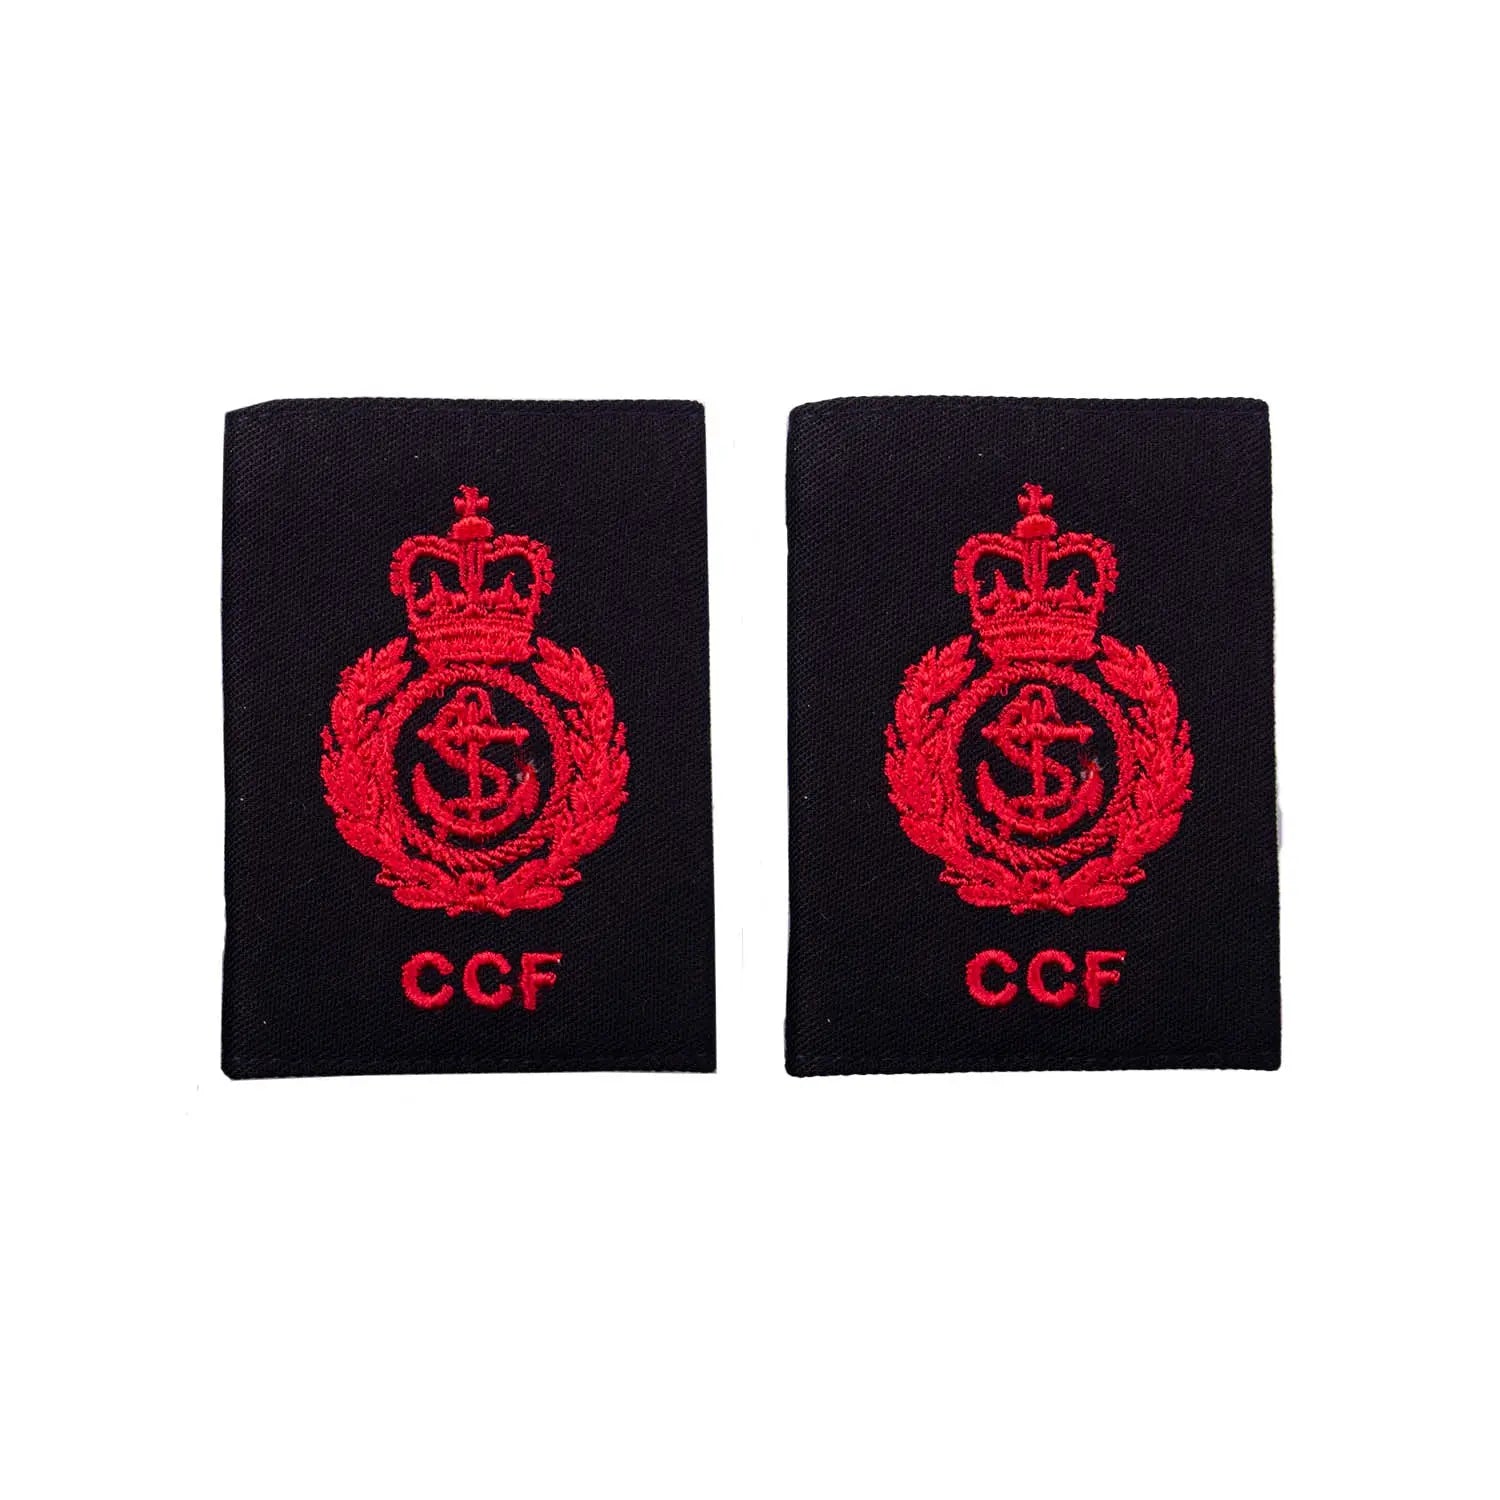 Chief Petty Officer Combined Cadet Force Slider Epaulette (CCF) wyedean